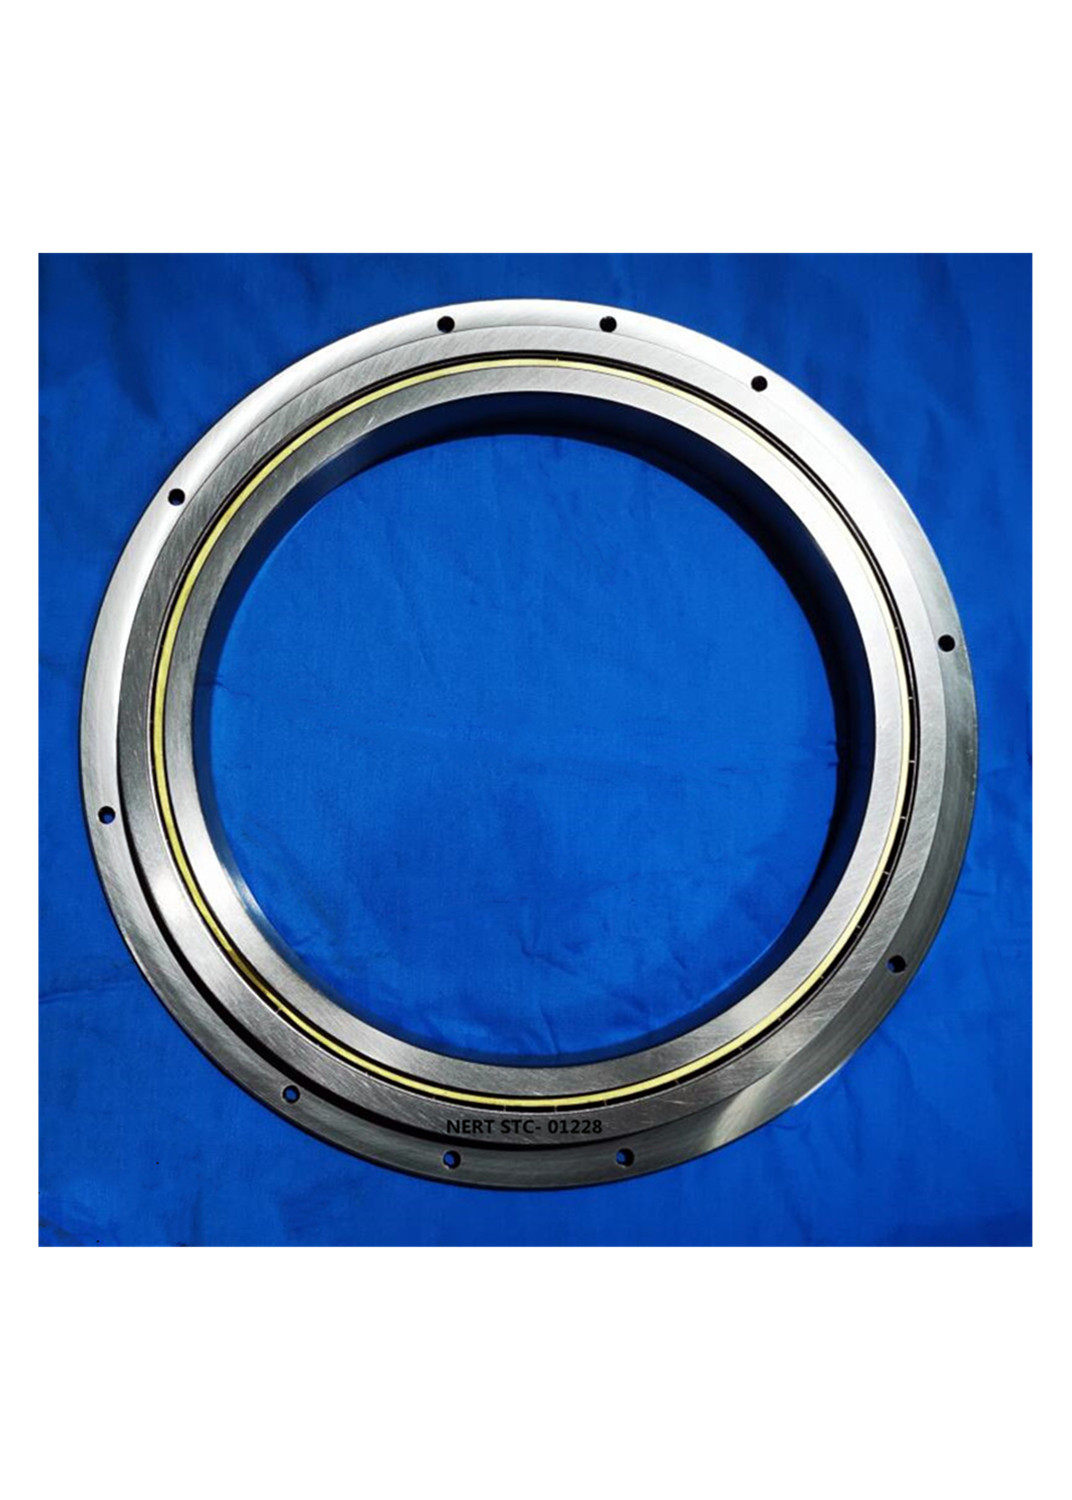 Multi-Wire Saw Idle Flywheel Bearing Developed And Produced By Luoyang BOBI (NERT)